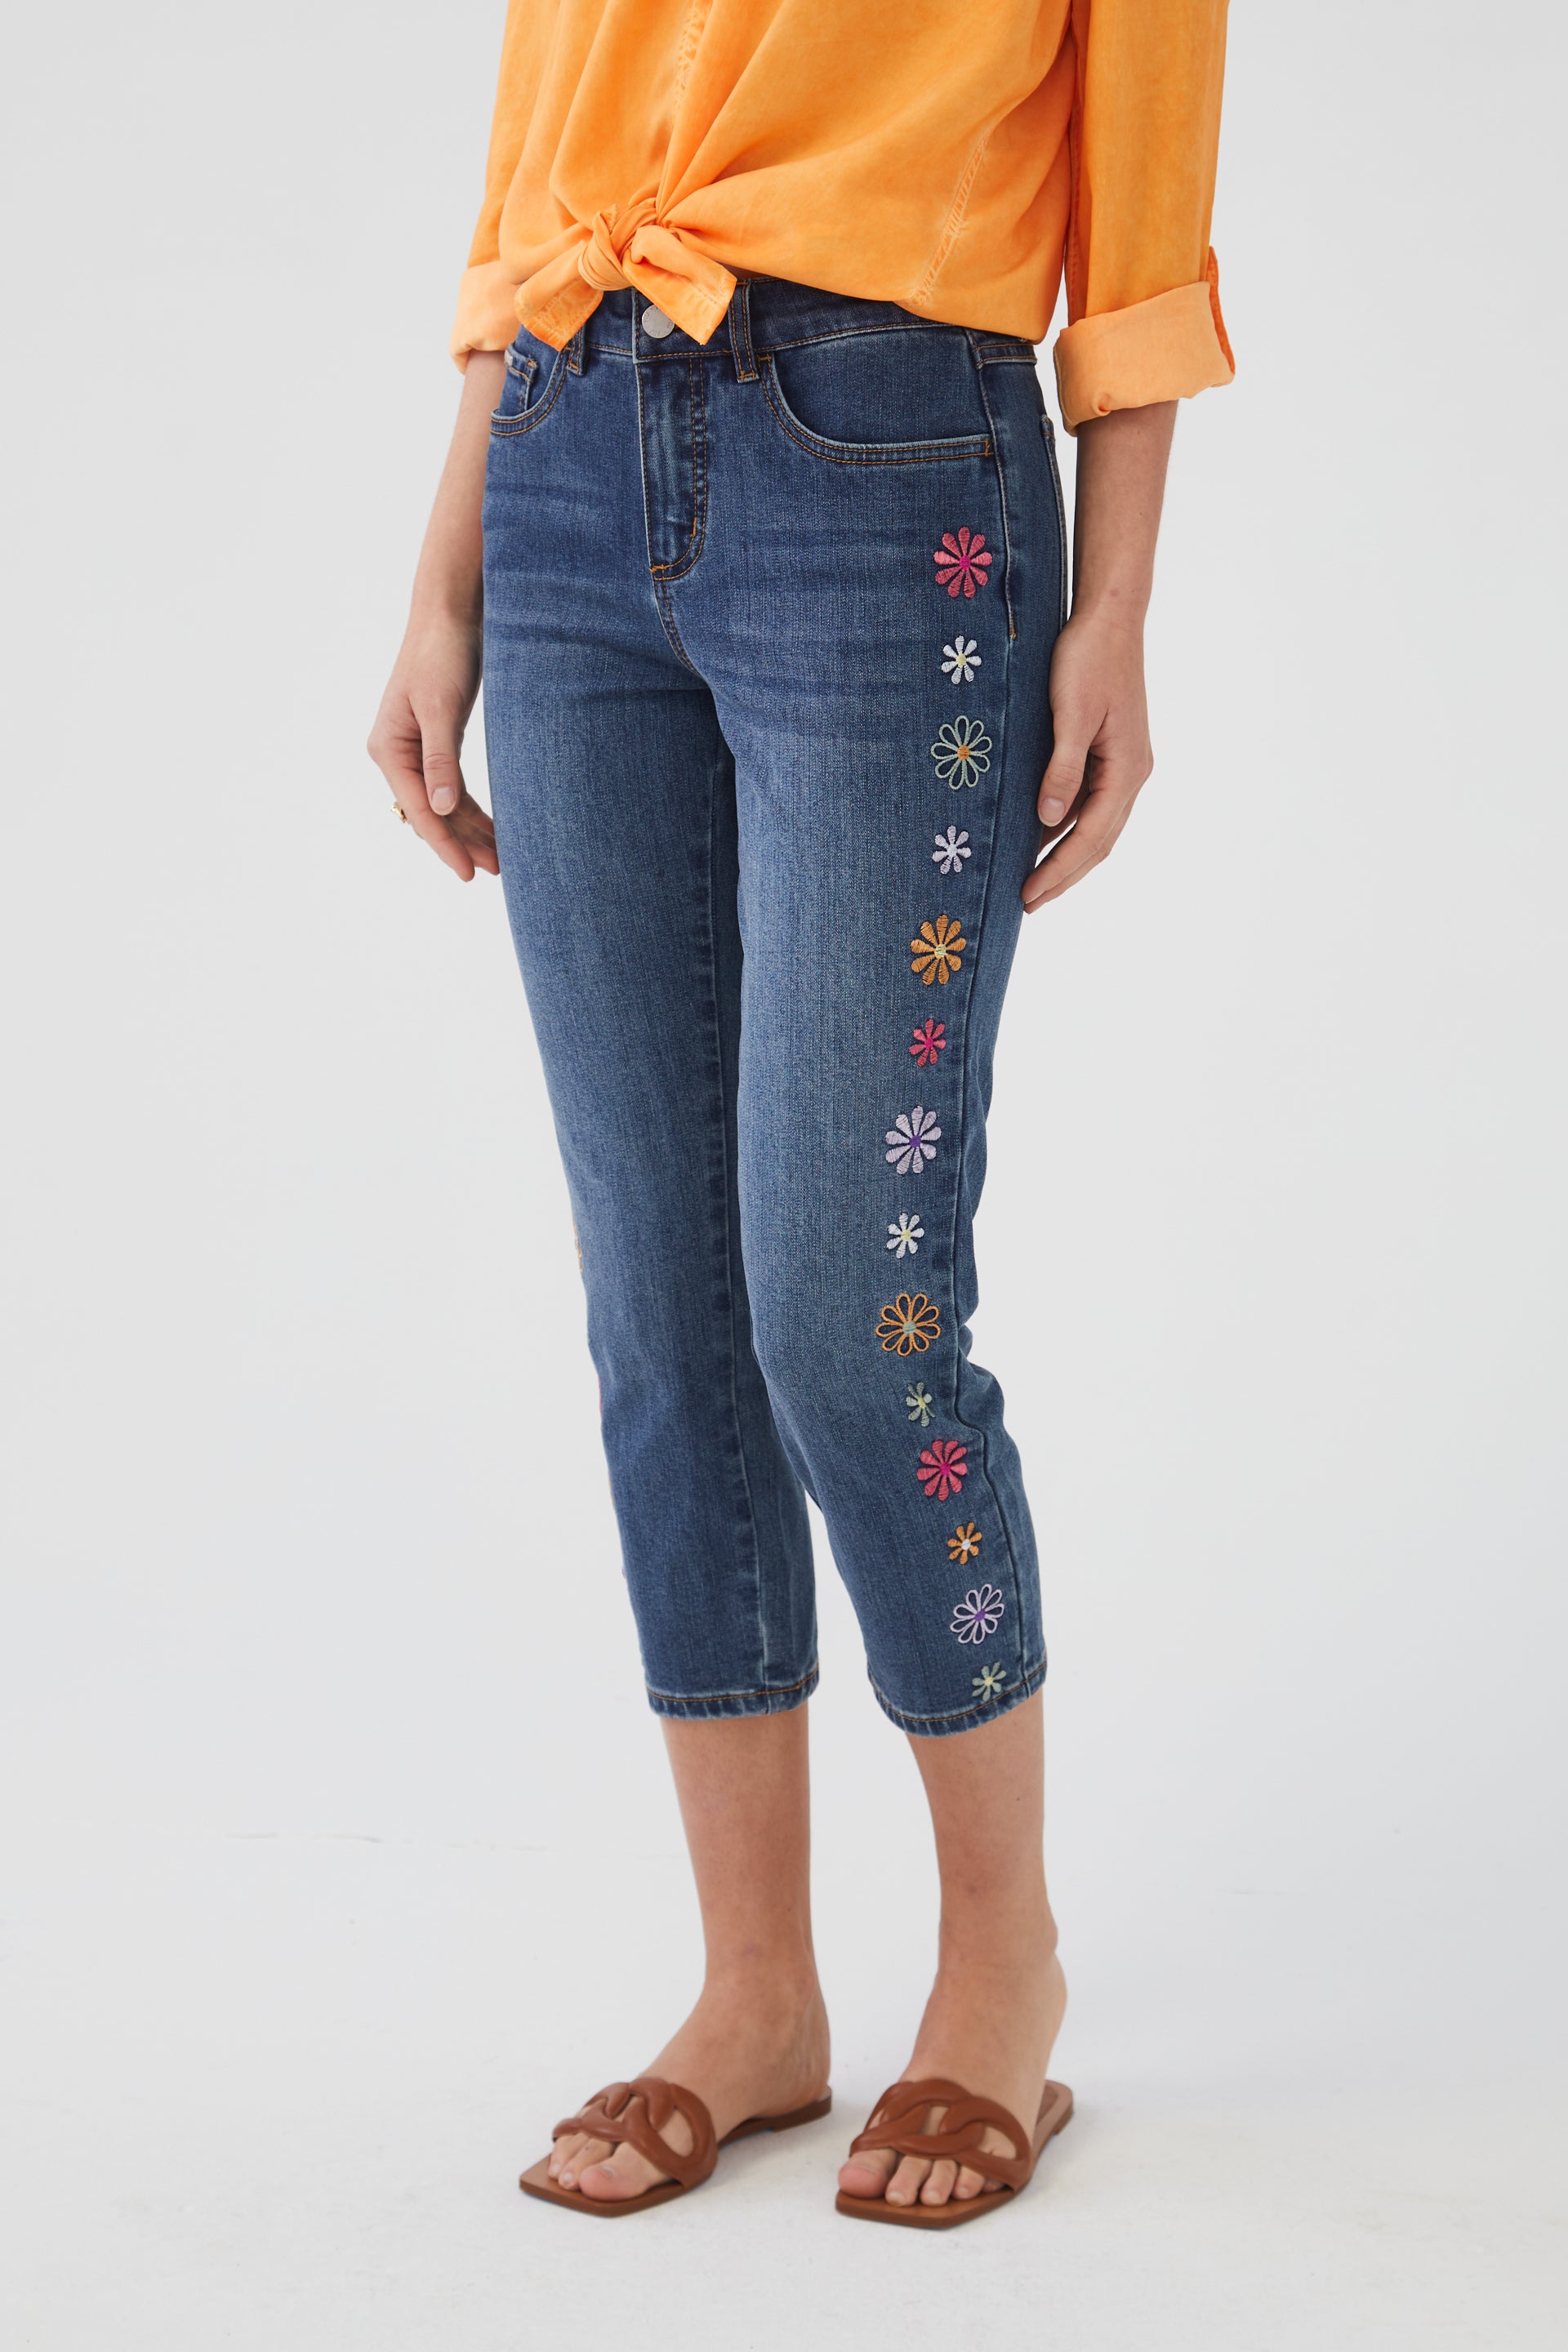 Painted Jeans Daisy Floral Painted Denim Be Amazing 